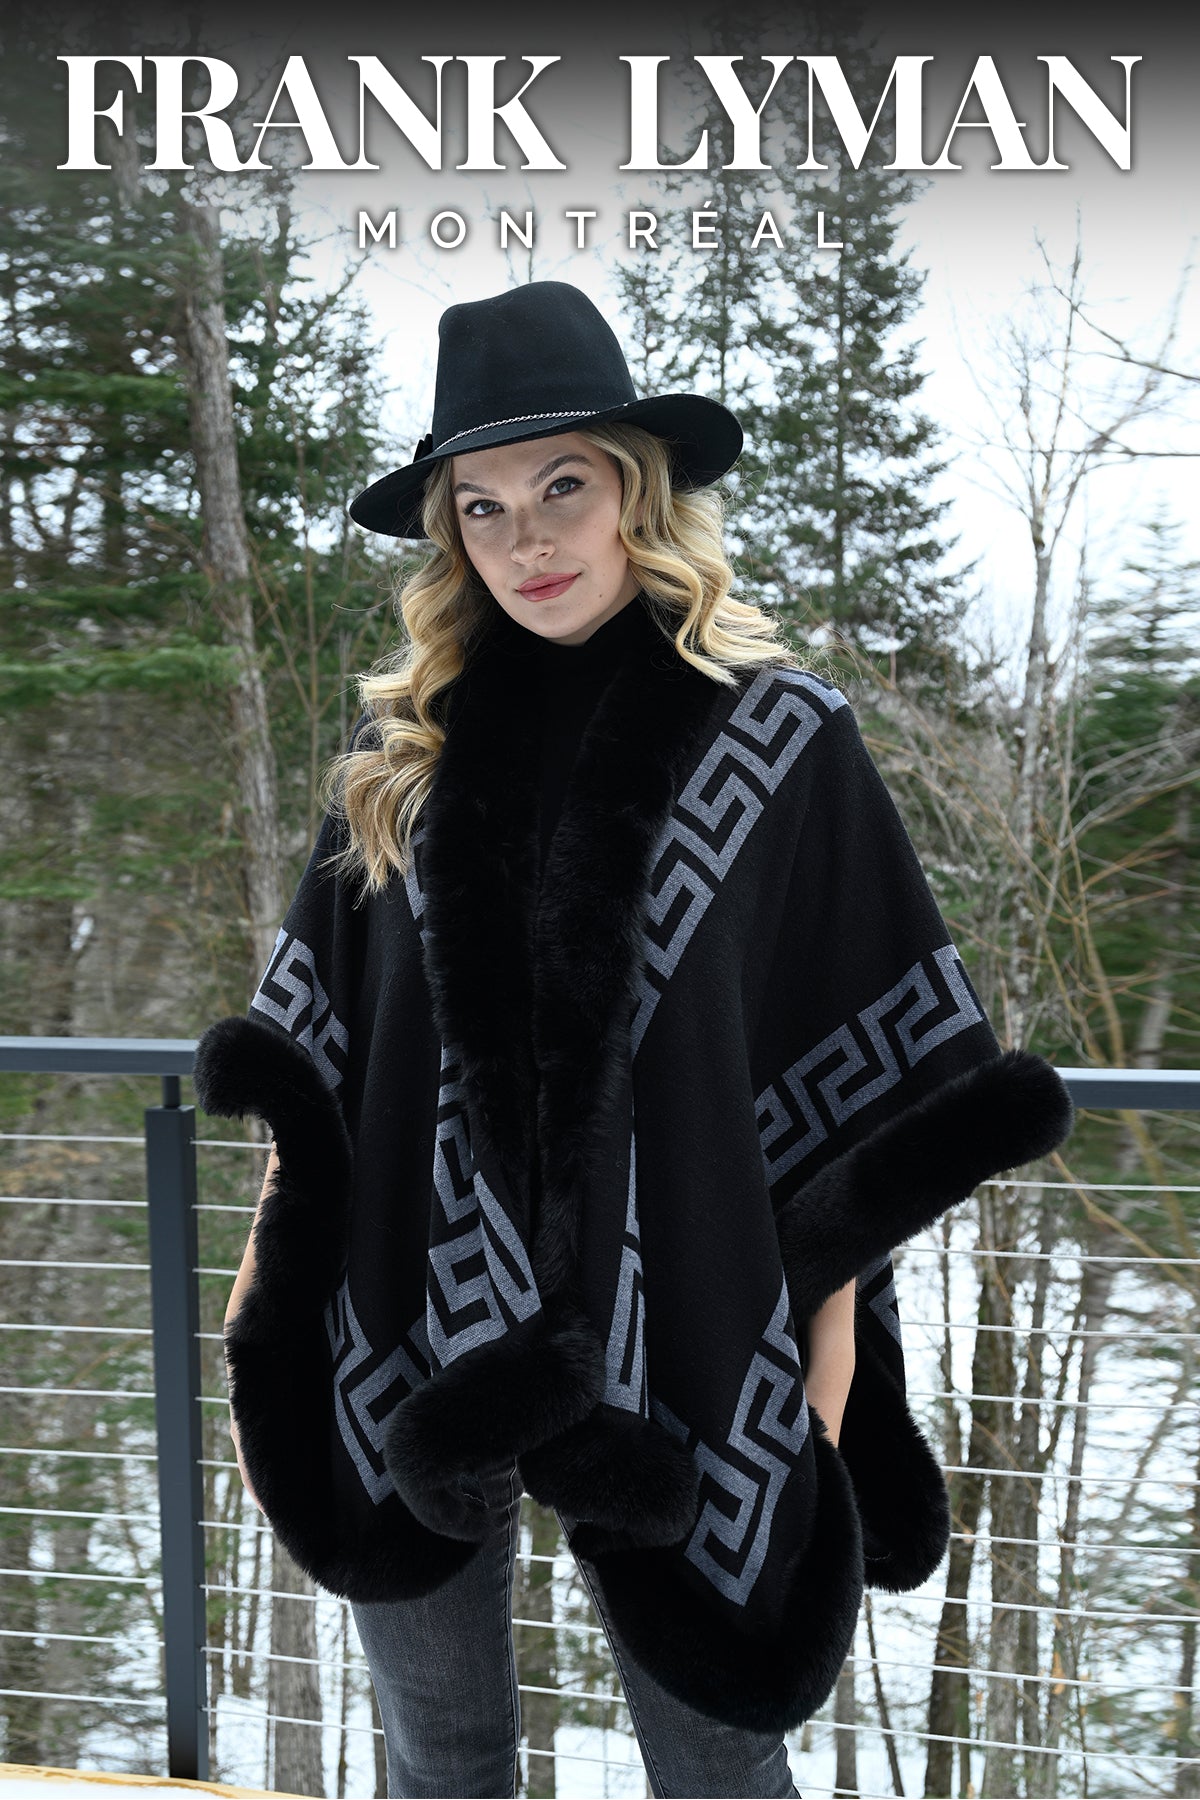 Frank Lyman Montreal Poncho Sweater-Frank Lyman Montreal Sweaters-Buy Frank Lyman Montreal Sweaters Online-Frank Lyman Montreal Online Shop-Frank Lyman Montreal Fall 2022 Collection